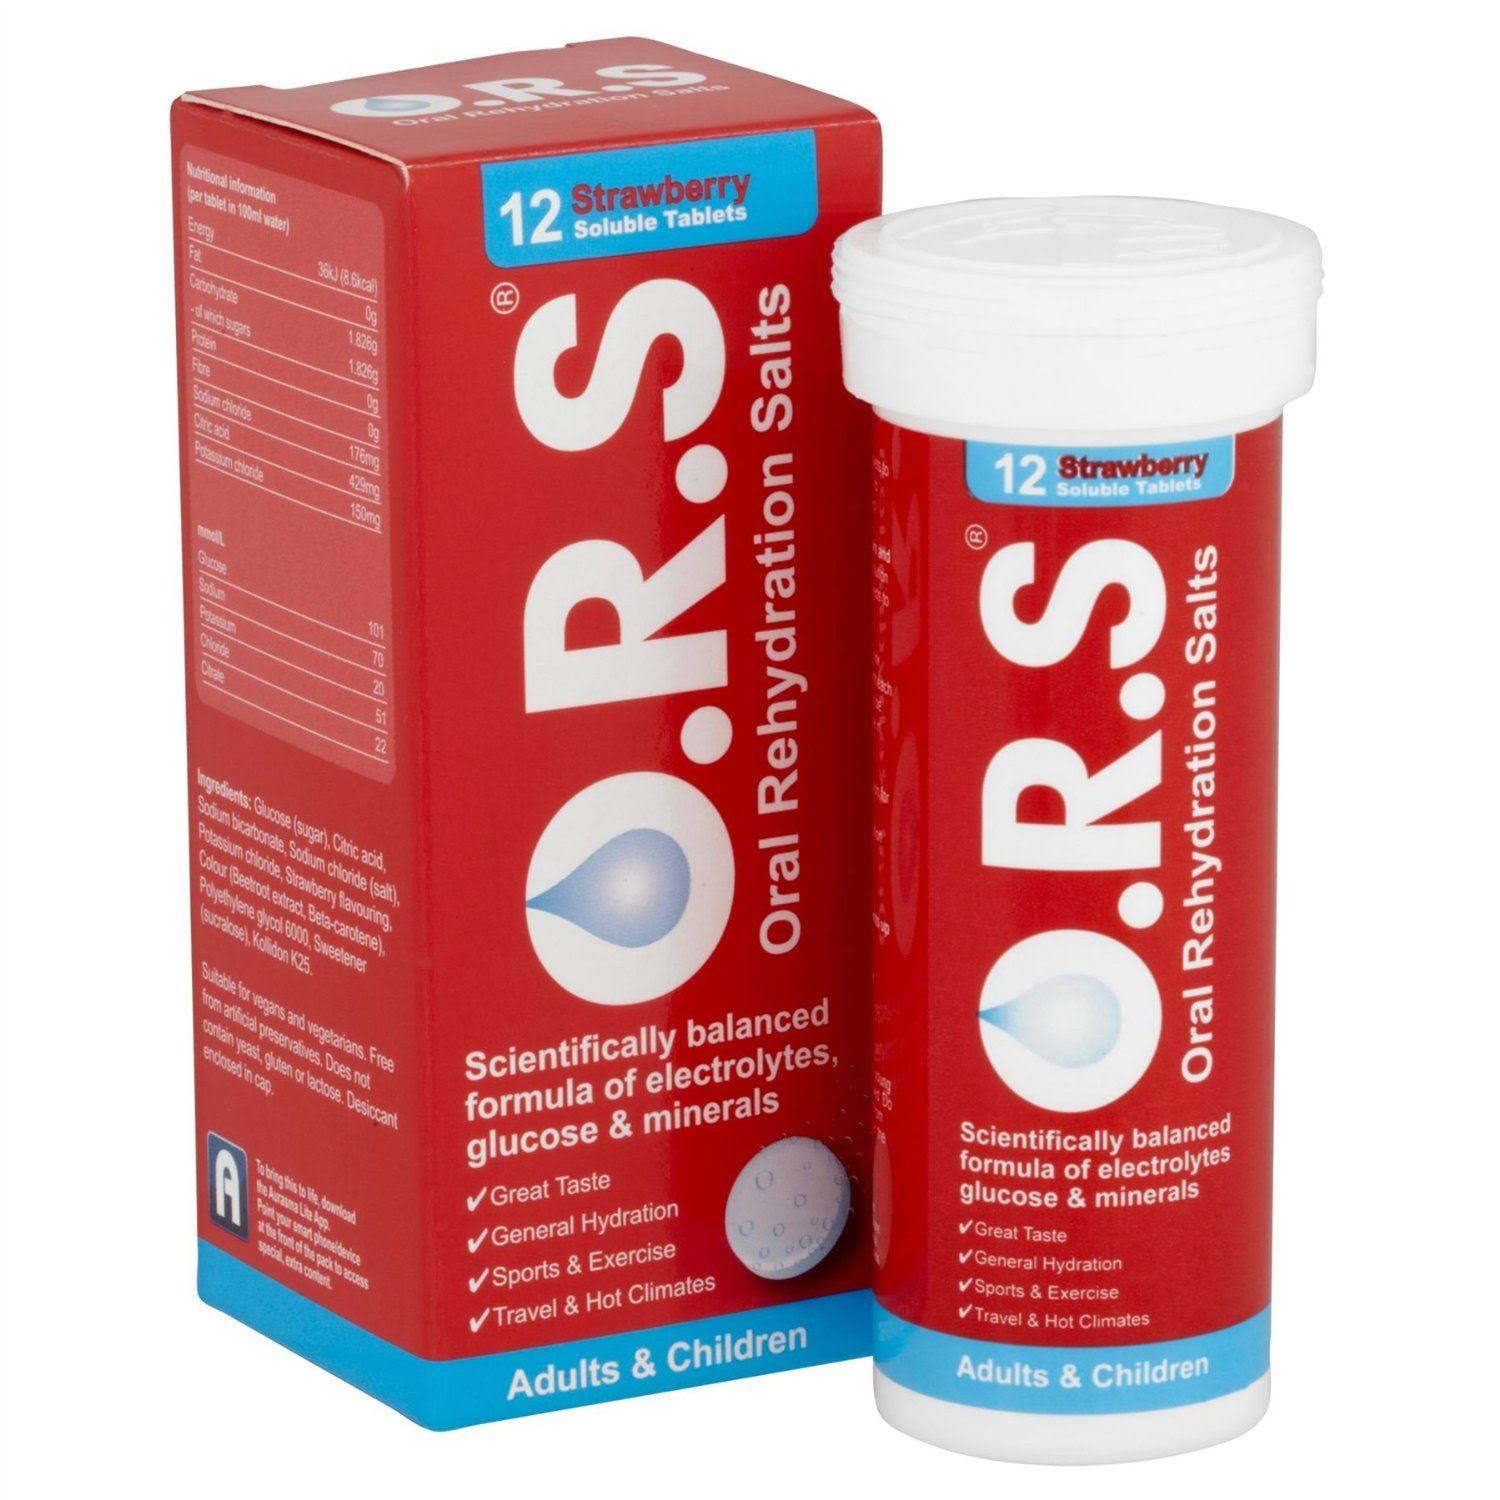 O.R.S Hydration Tablets - Adults and Children, 12 Strawberry Flavour Soluble Tablets